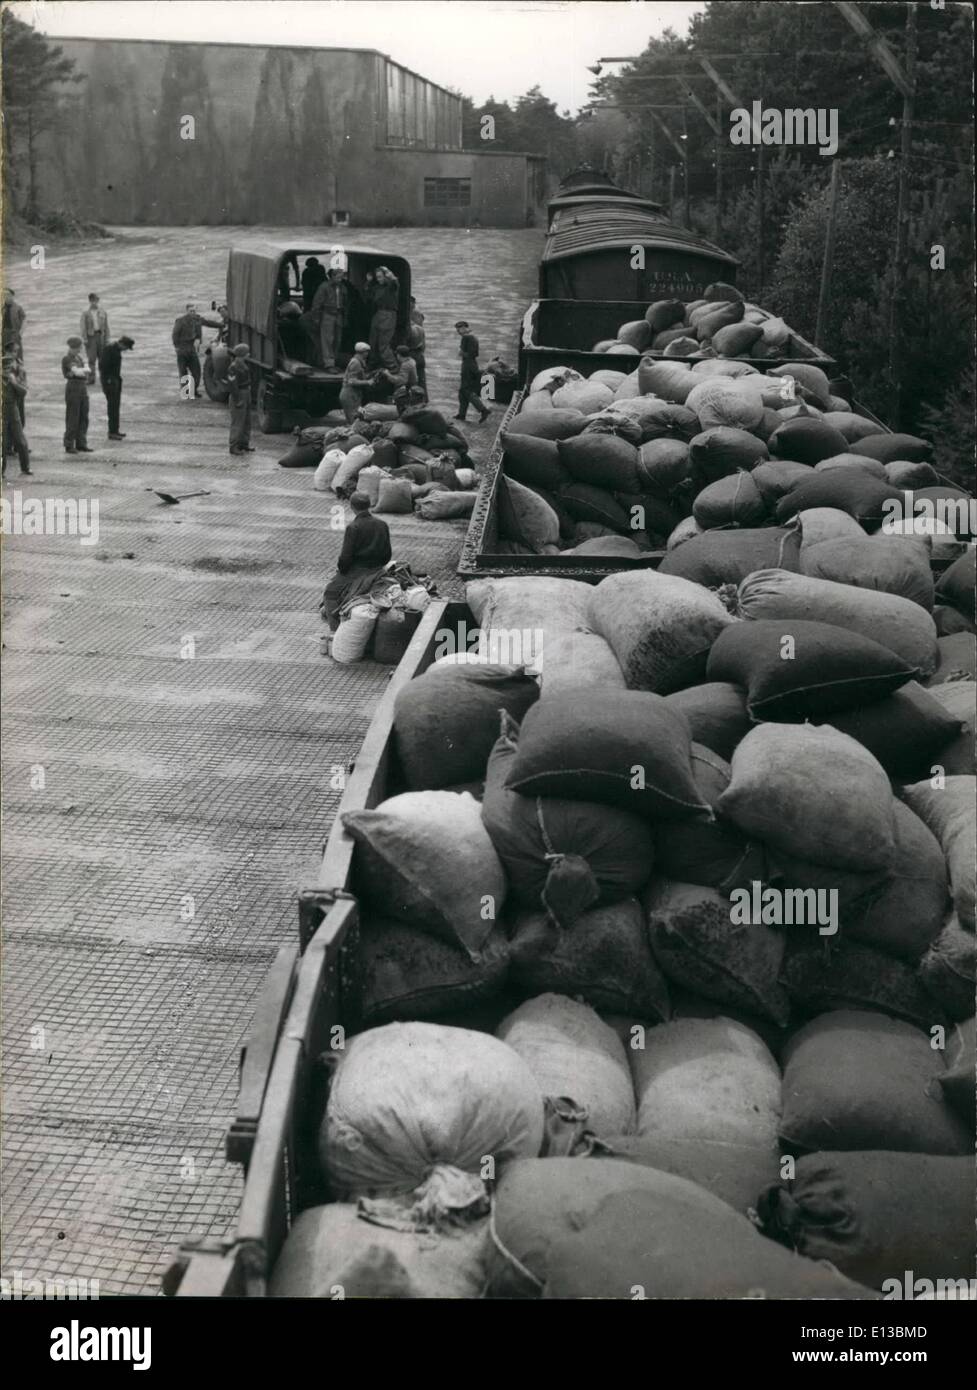 Feb. 29, 2012 - Readied for the Berlin Airlift - Coal & food for Berlin 1948 Food. APR Stock Photo